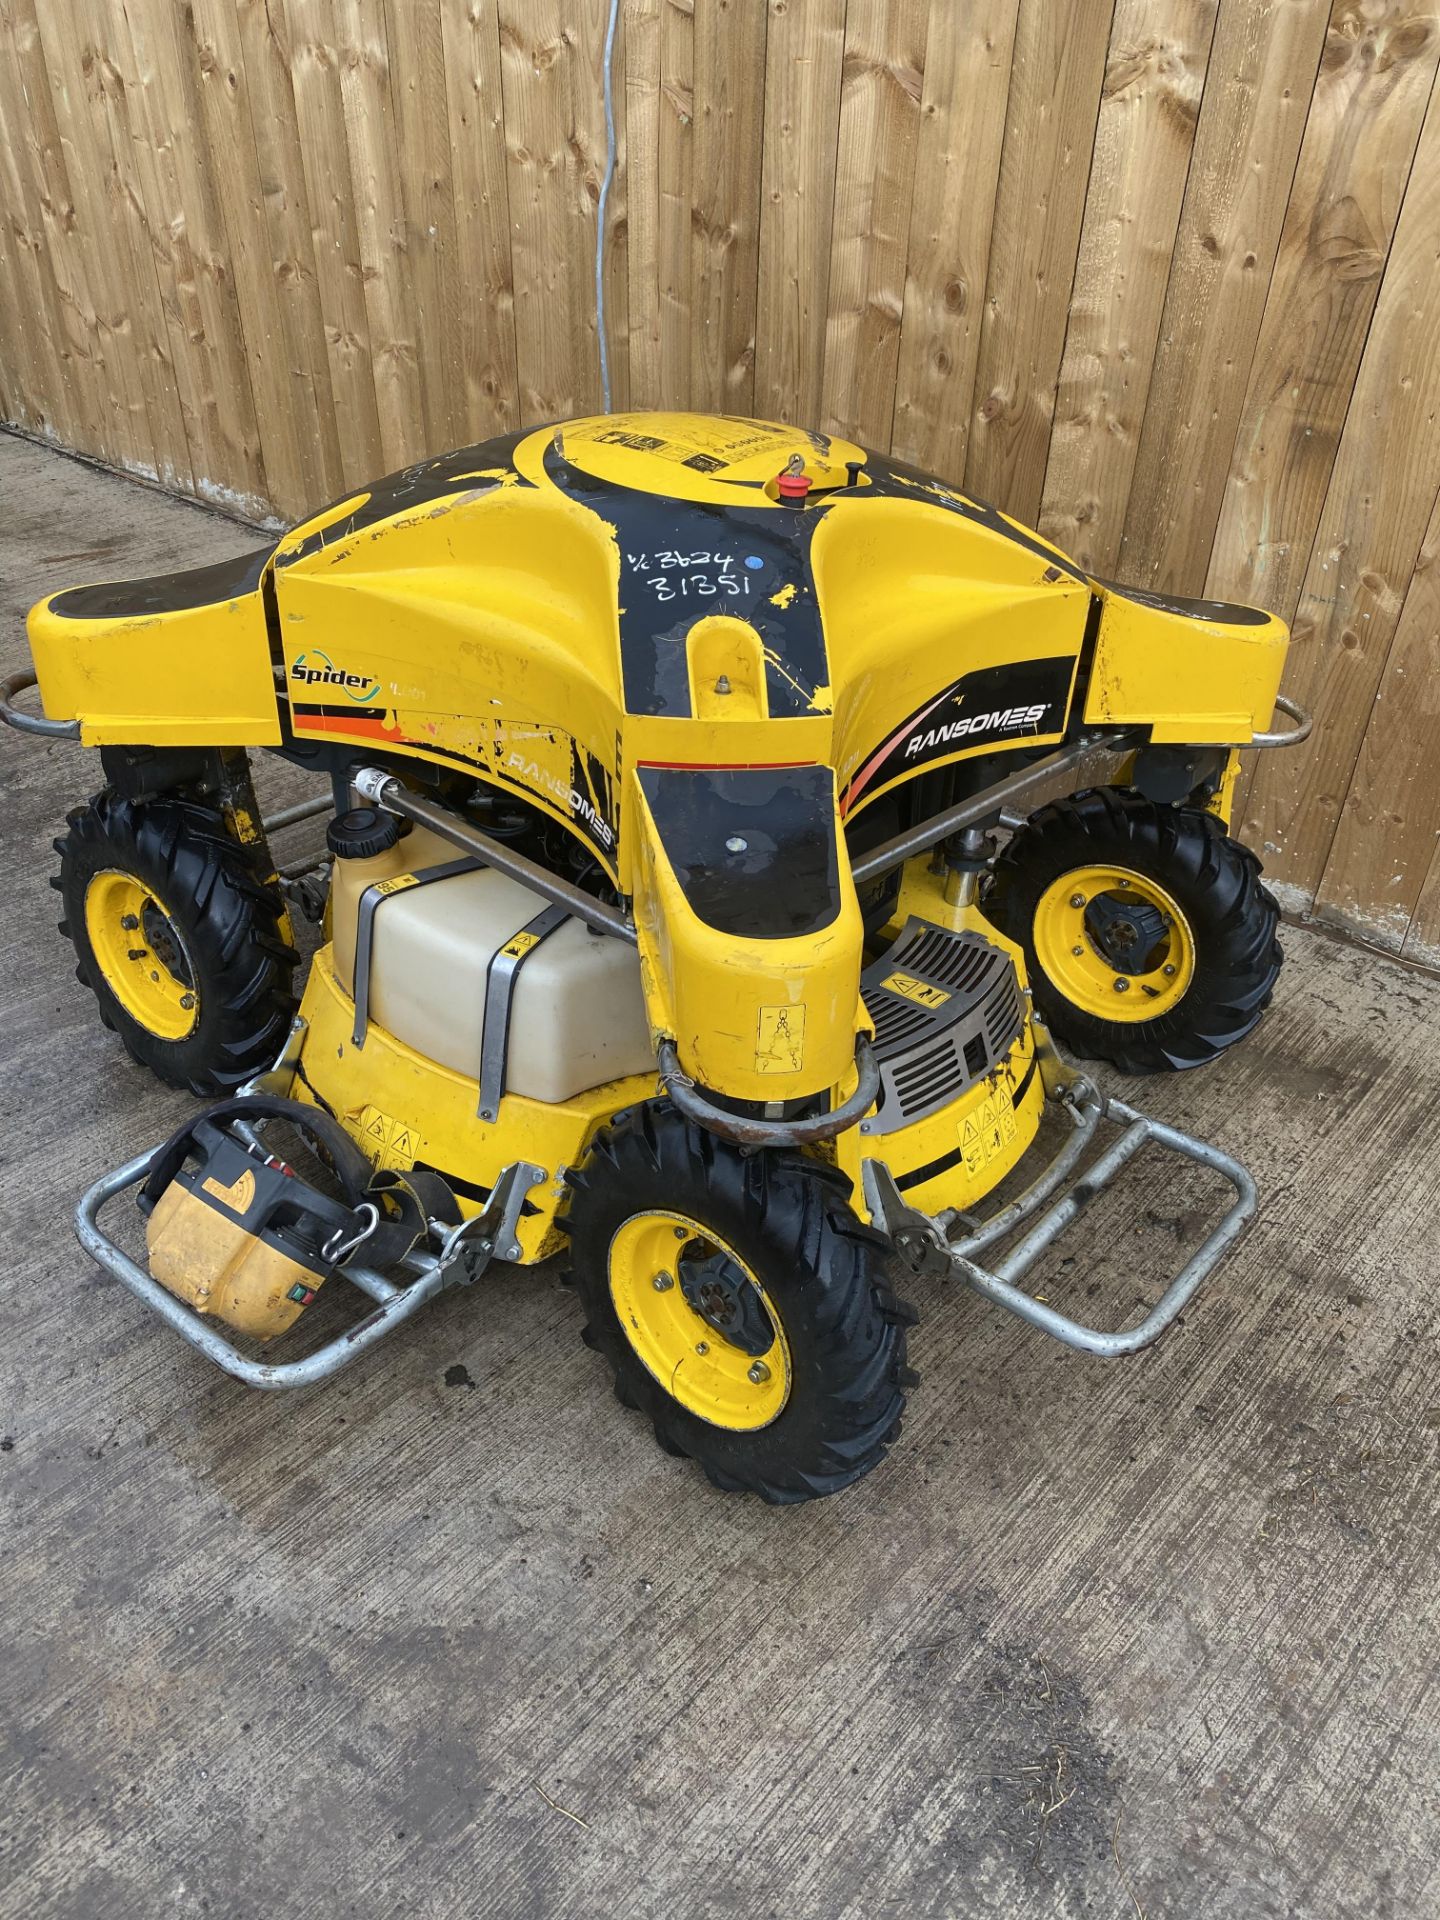 Ransomes spider Remote control mower